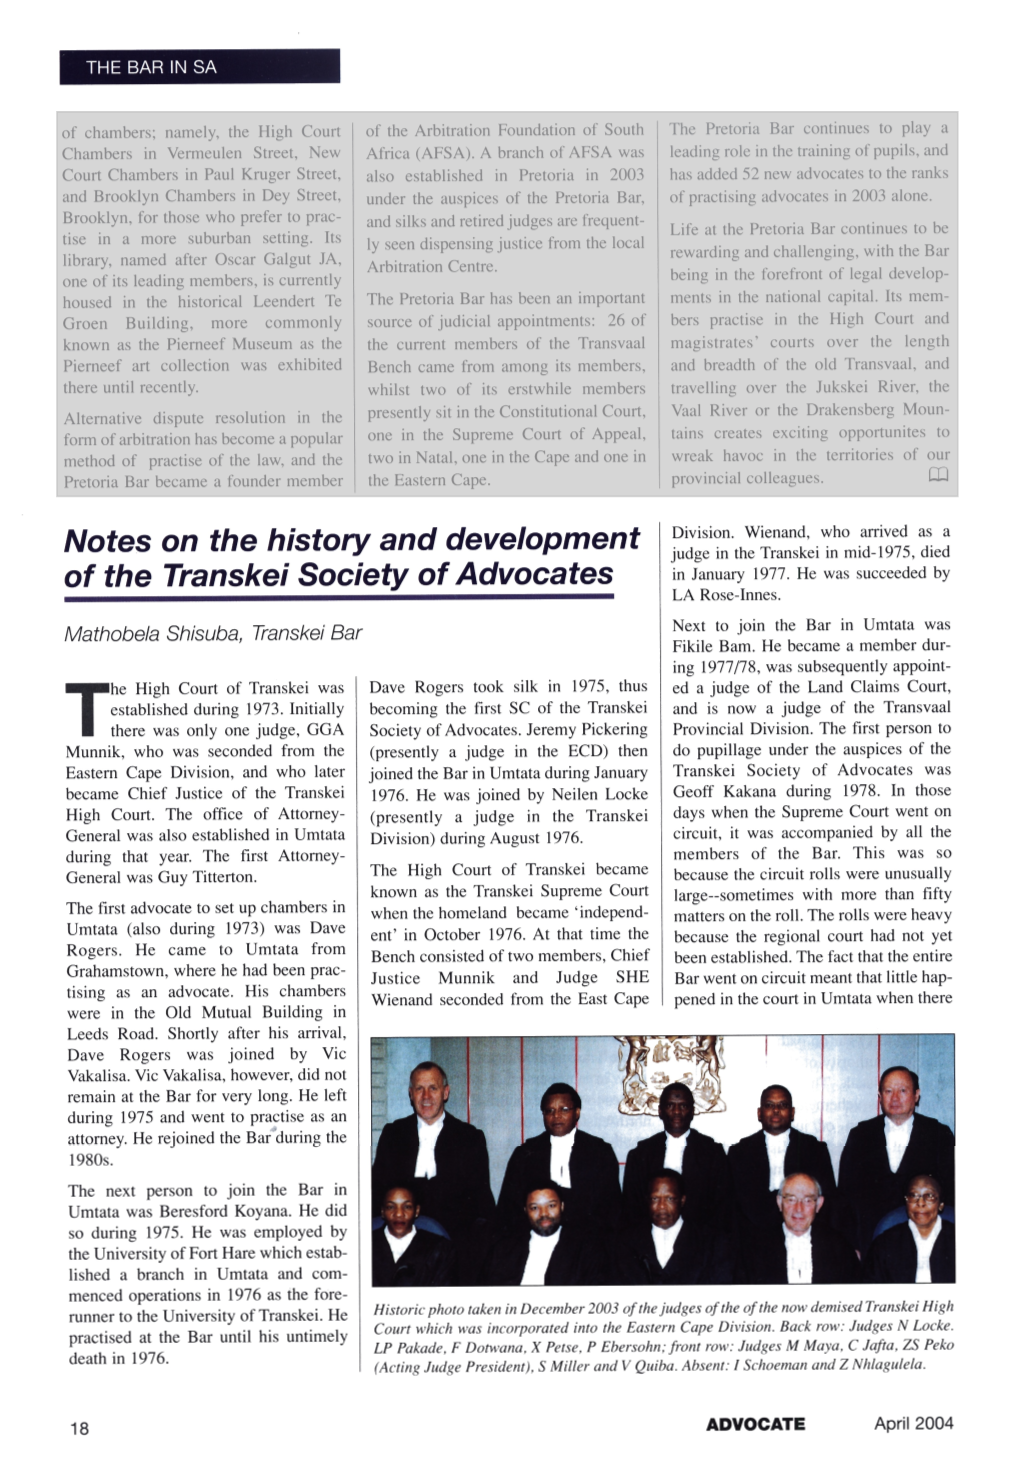 Notes on the History and Development of the Transkei Society Ofadvocates M